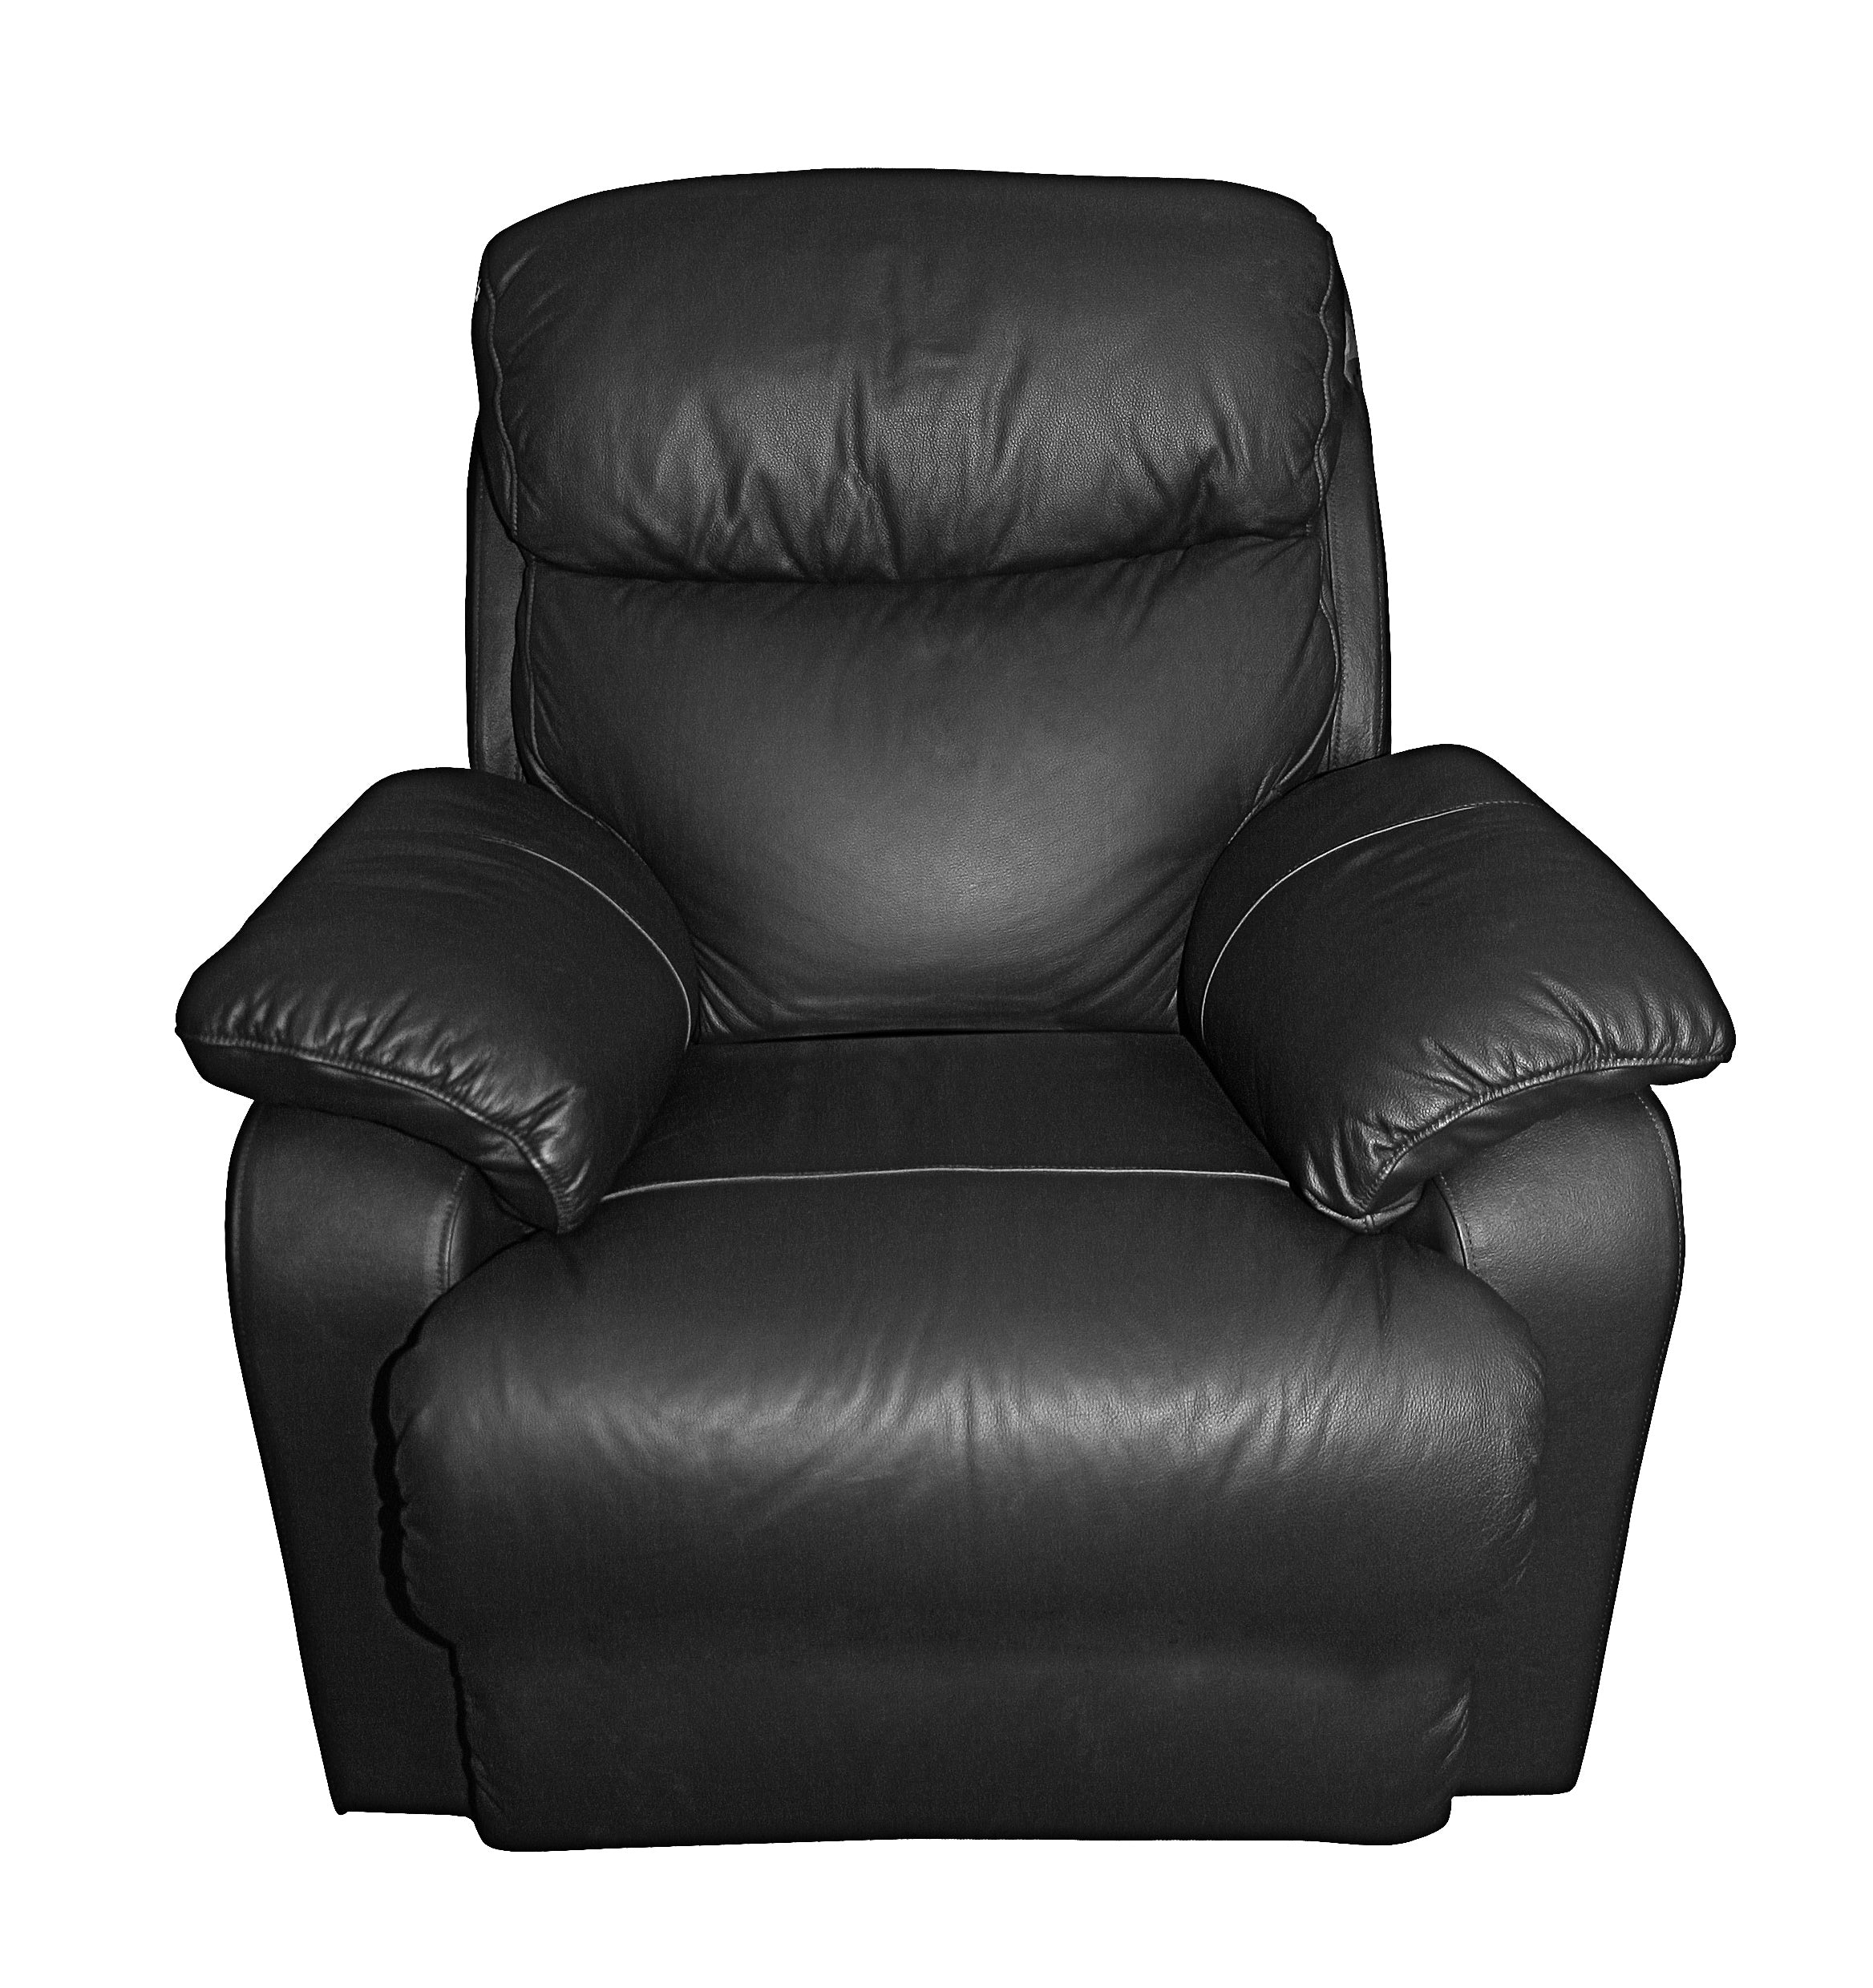 TaylorFam Upholstered Leather Recliner